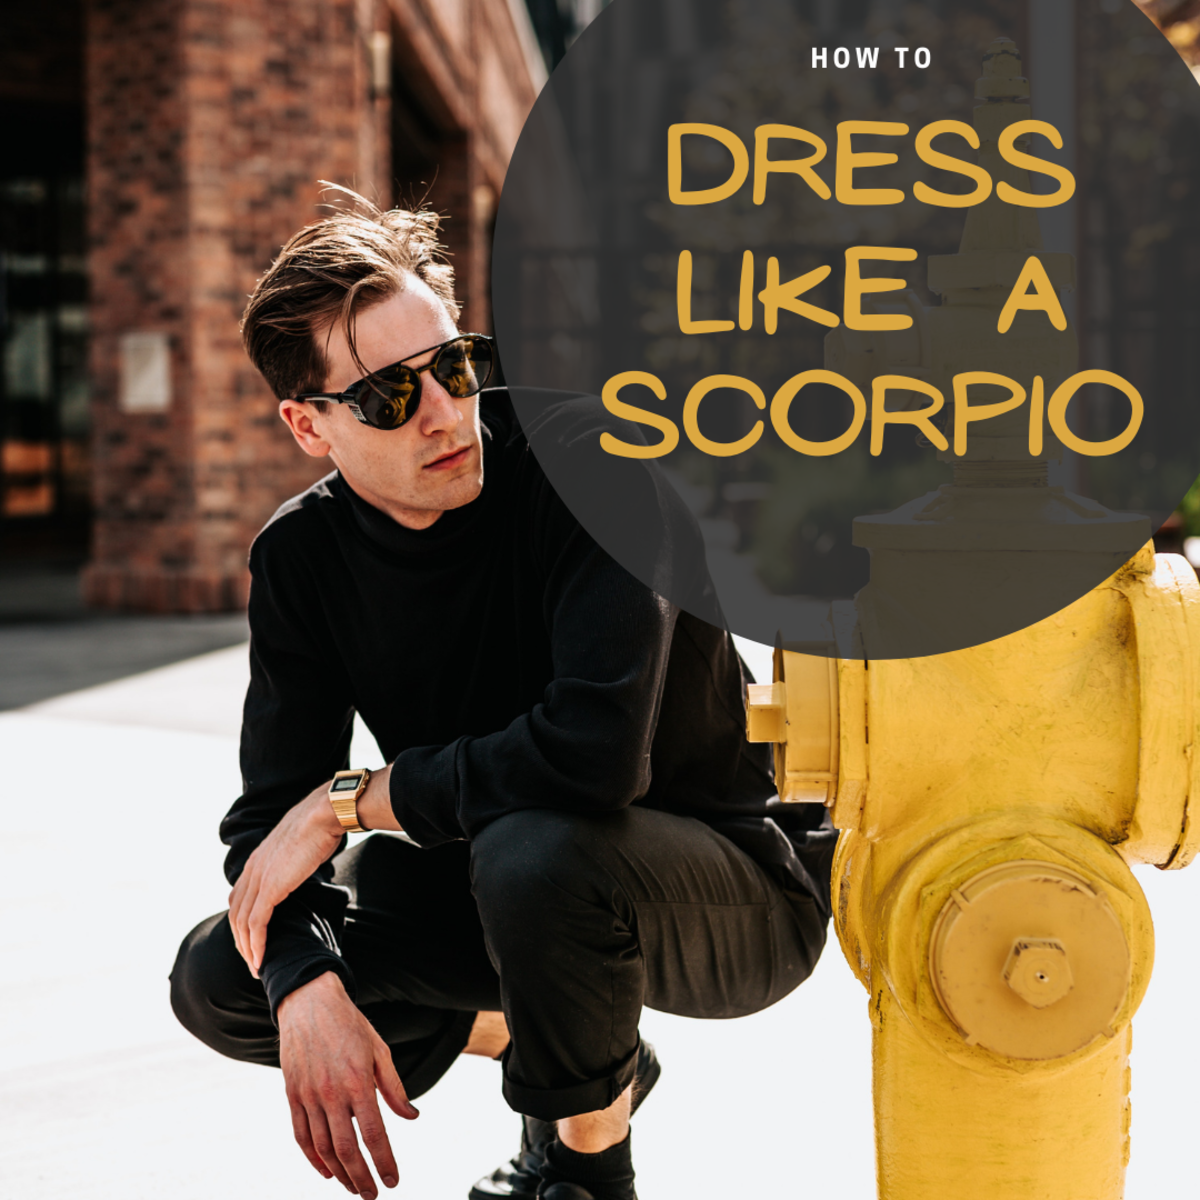 Scorpio outfits should look mysterious, dark, and seductive. The sign is elegant, so they need clothes that fit well and don't look sloppy.